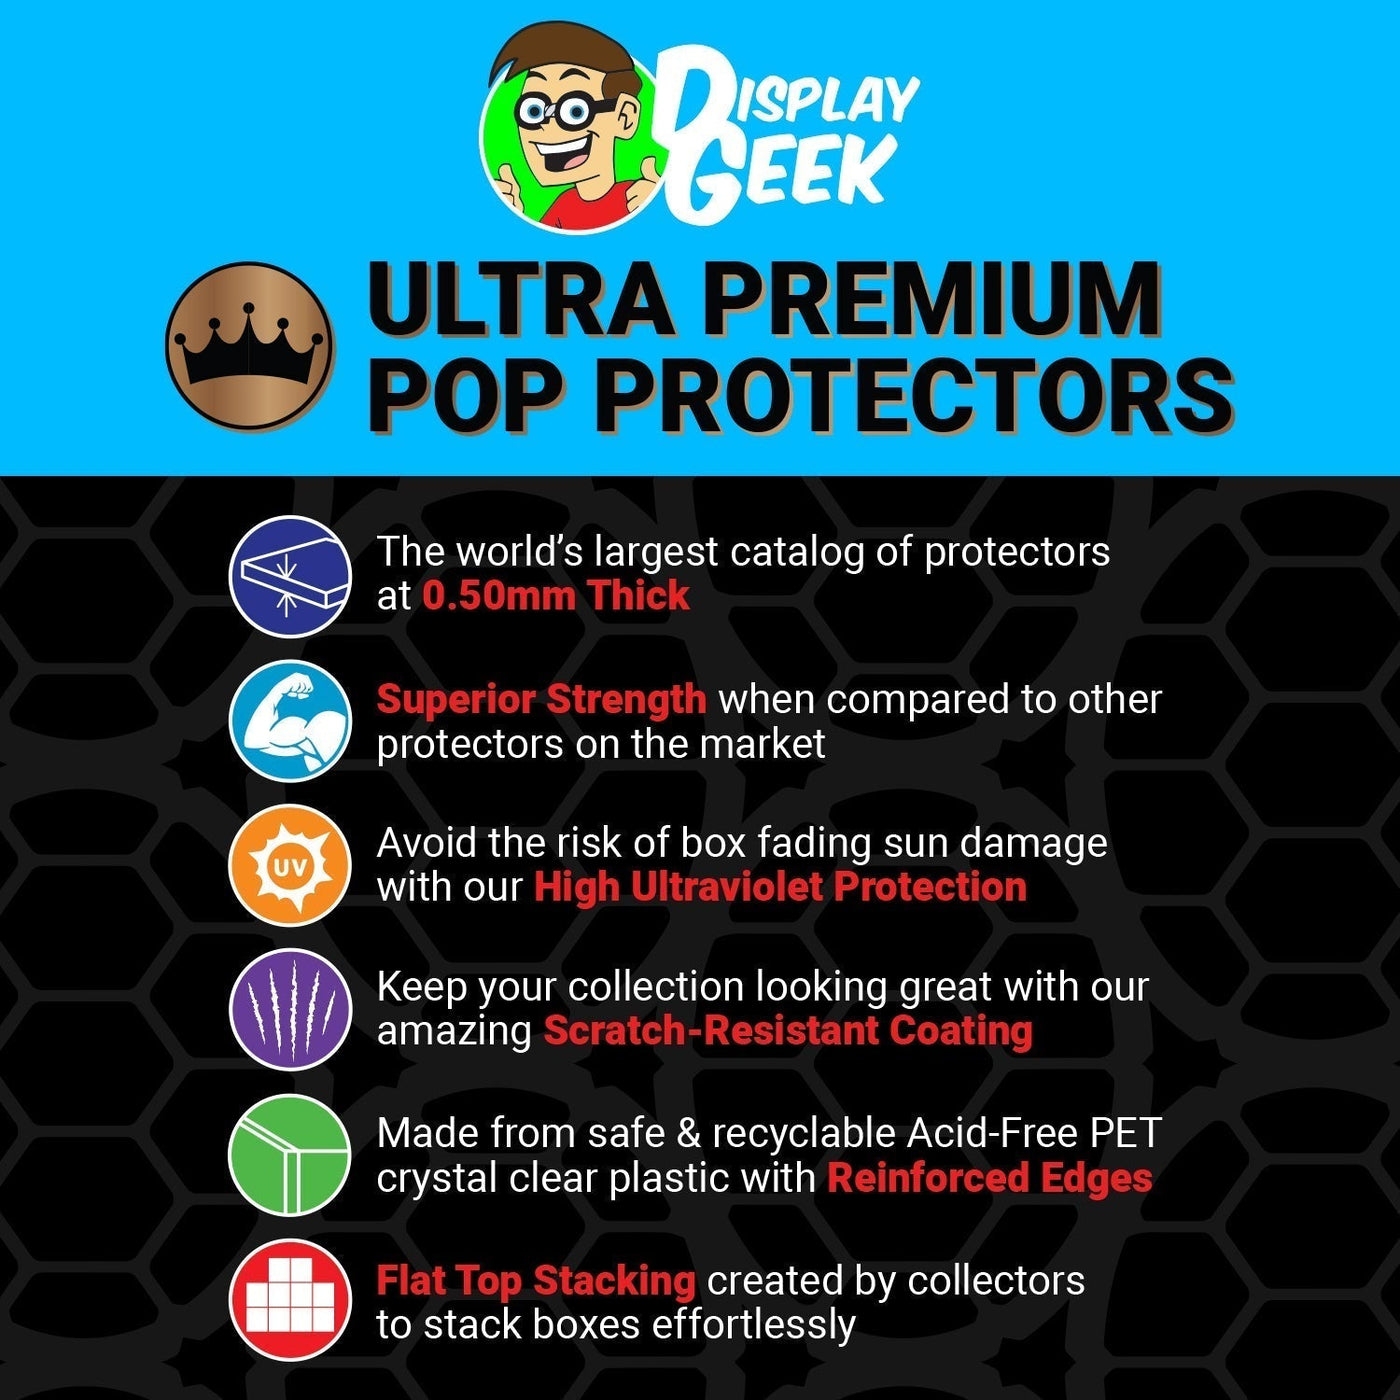 Pop Protector for 6 inch Stay Puft Marshmallow Man #109 Super Funko Pop on The Protector Guide App by Display Geek